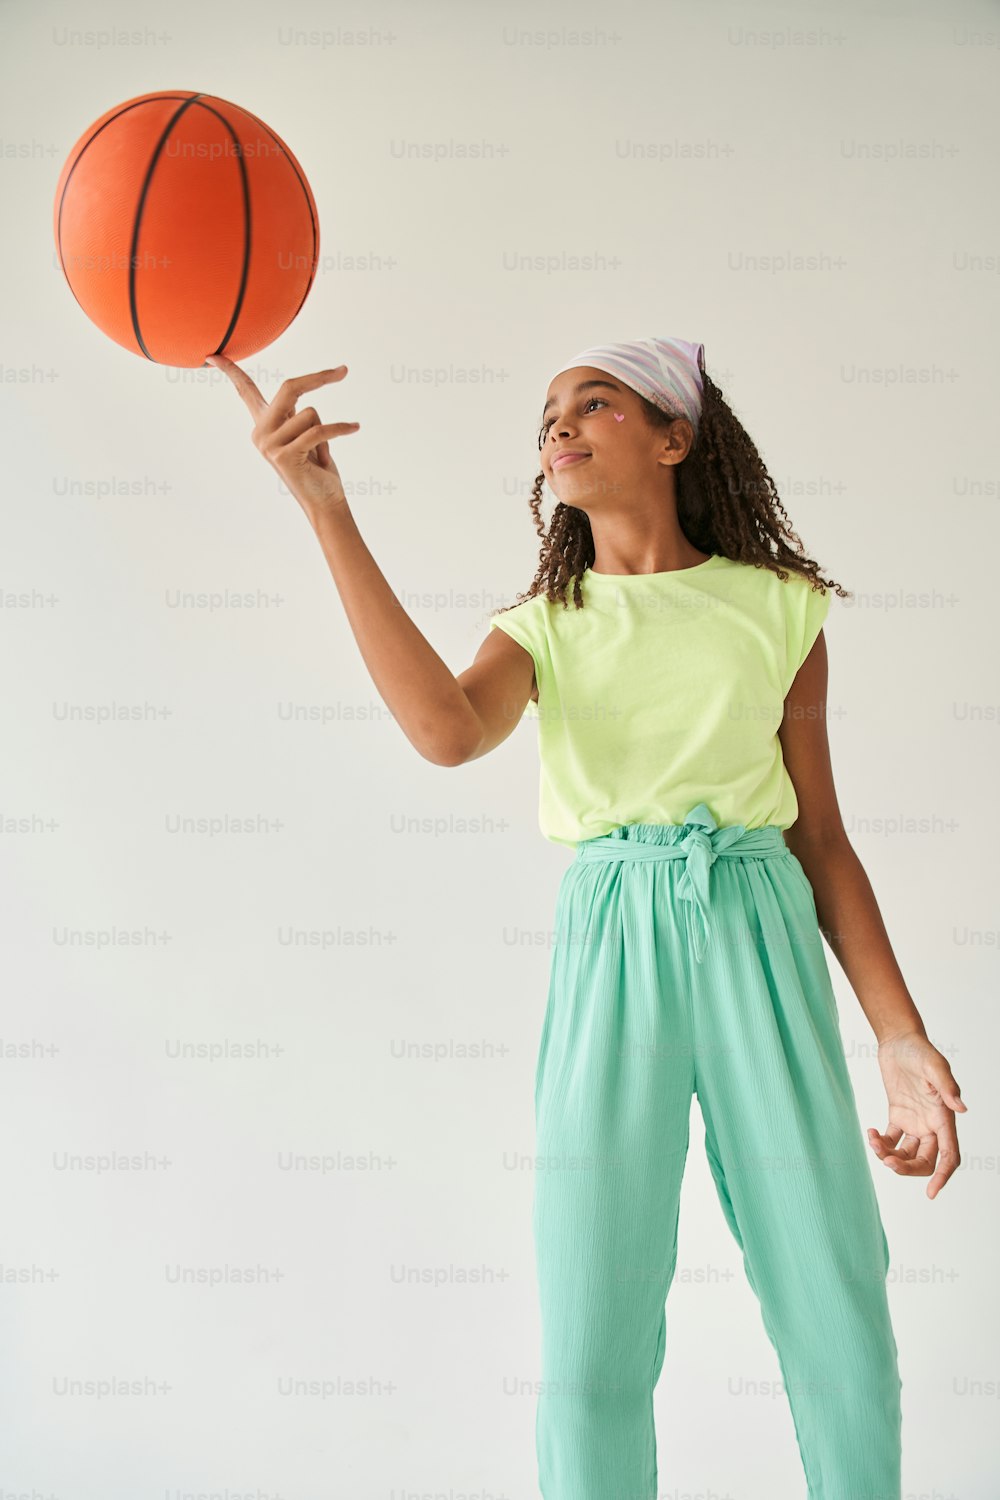 Black little girl spinning basketball ball on her finger. Smiling brunette schoolgirl with heart shaped sticker on her face. Concept of childhood. Isolated on grey background. Studio shoot. Copy space